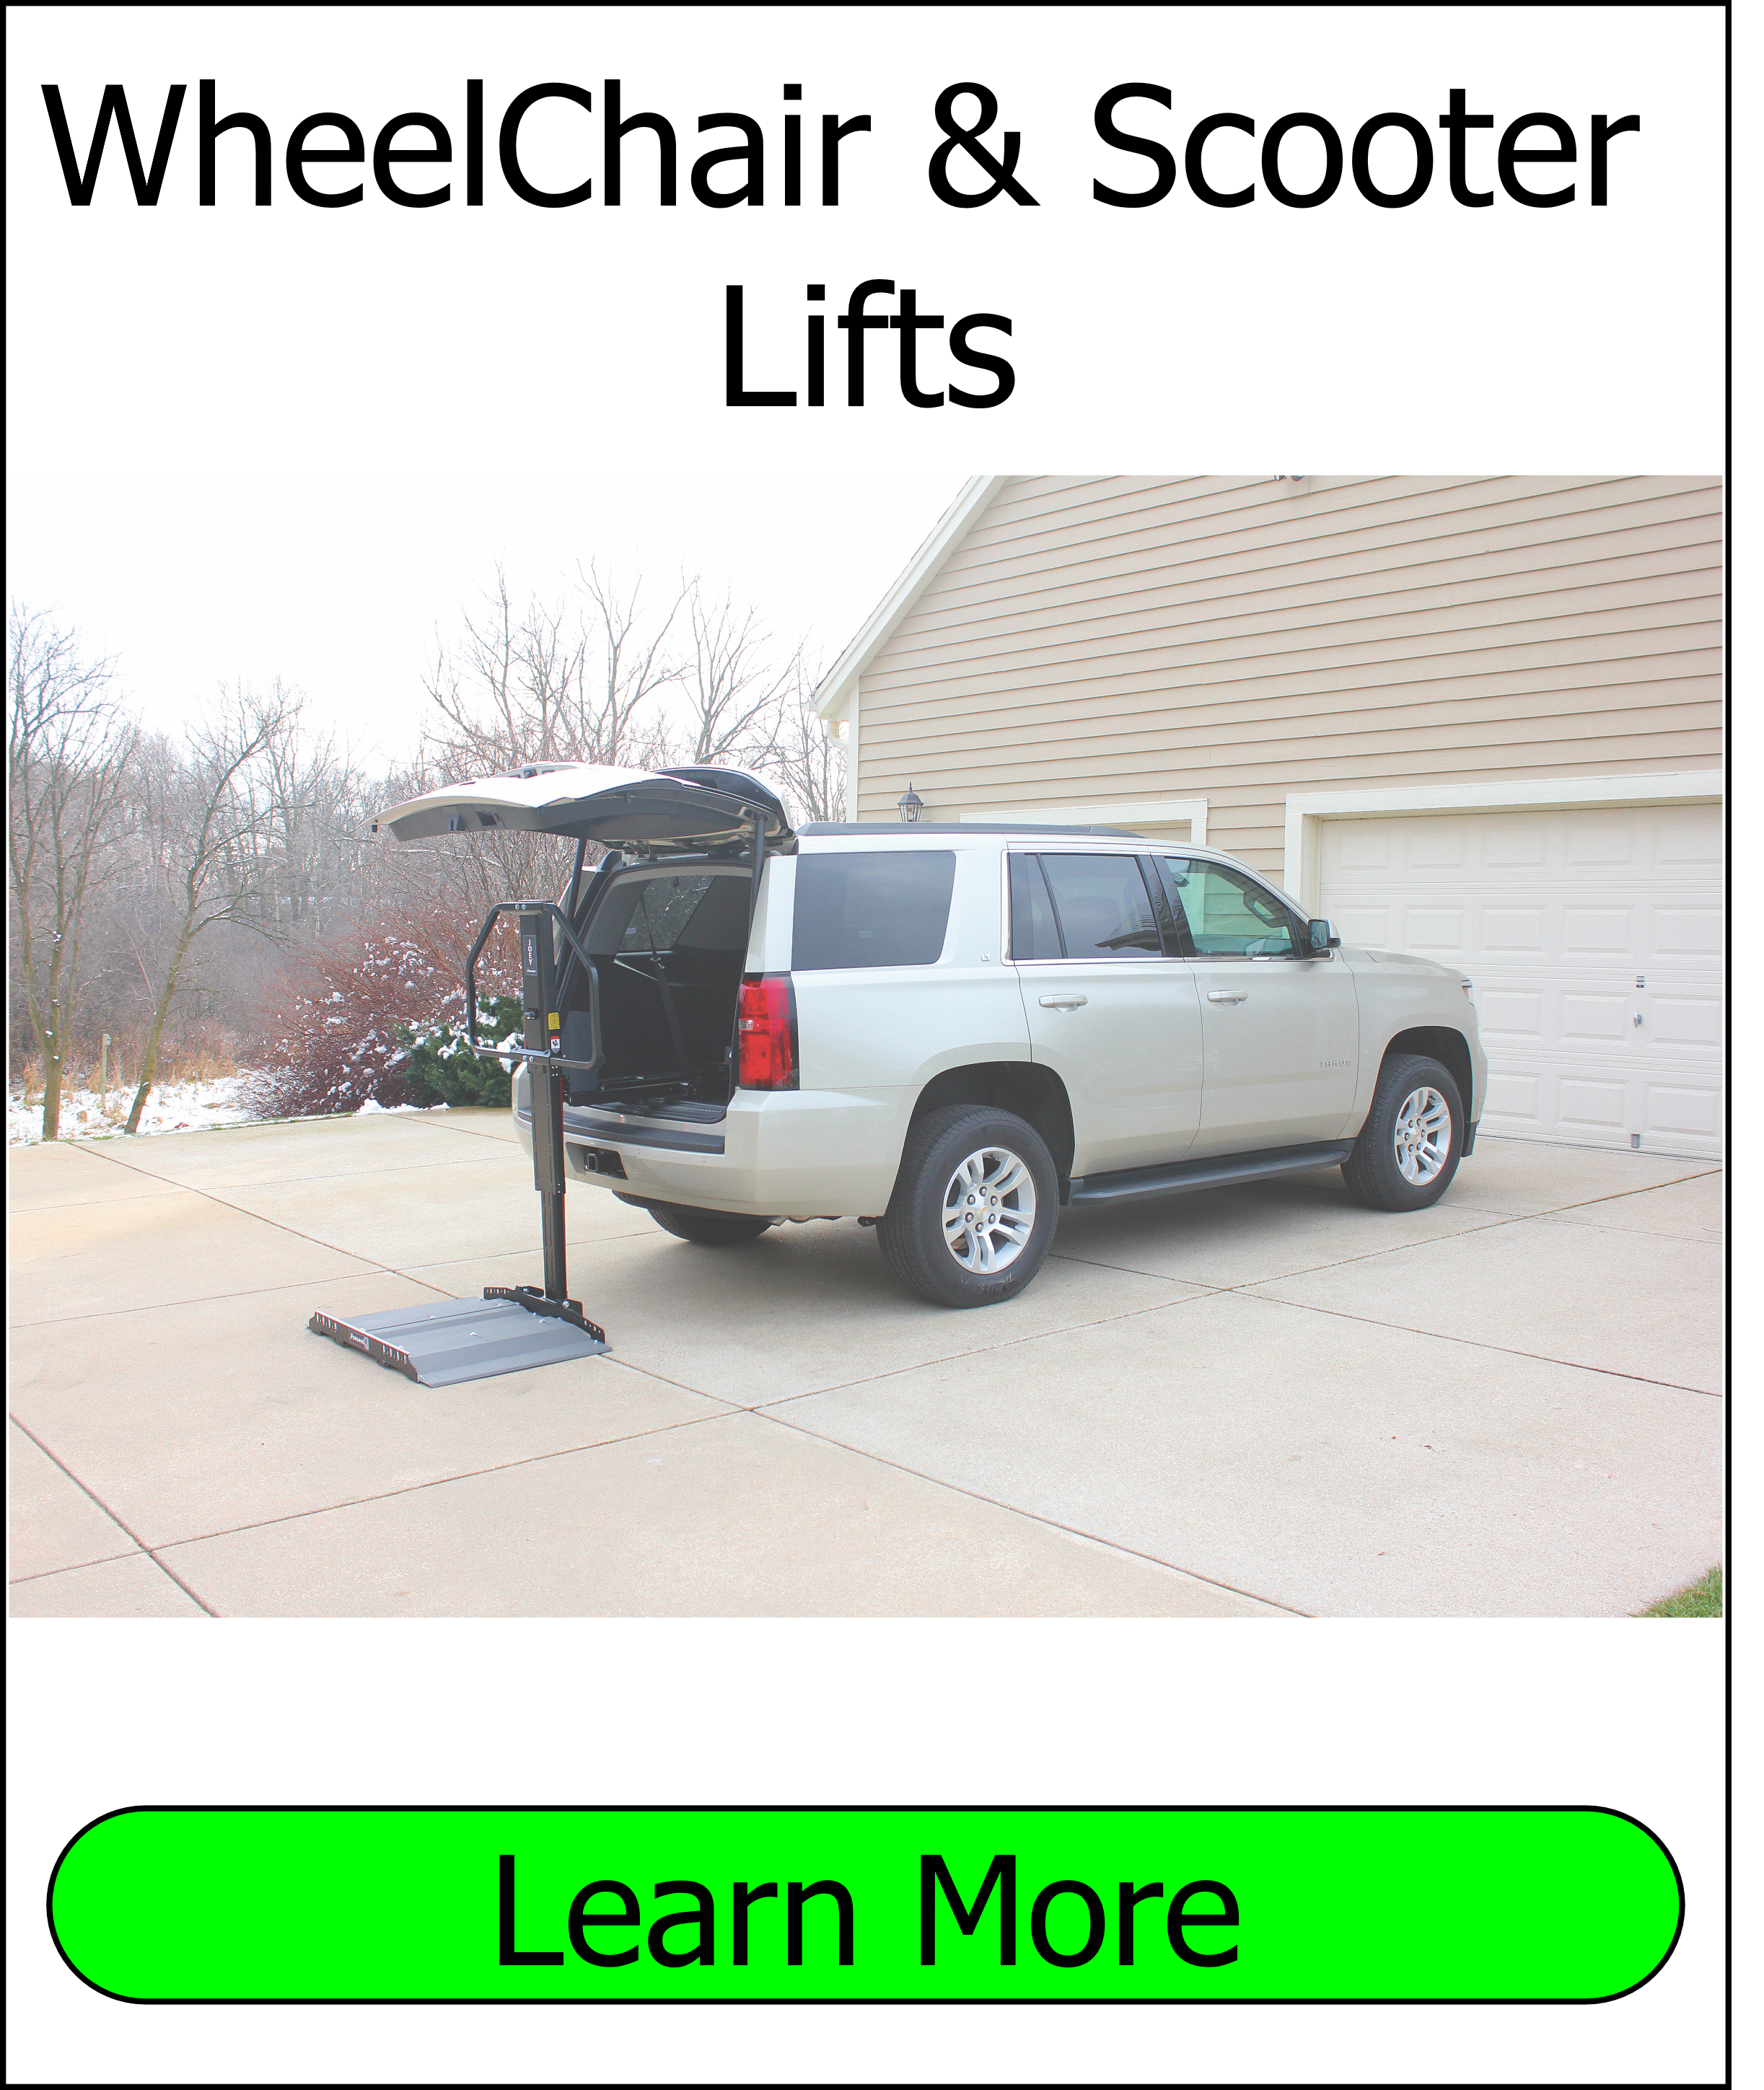 We Install Wheelchair and Scooter Lifts